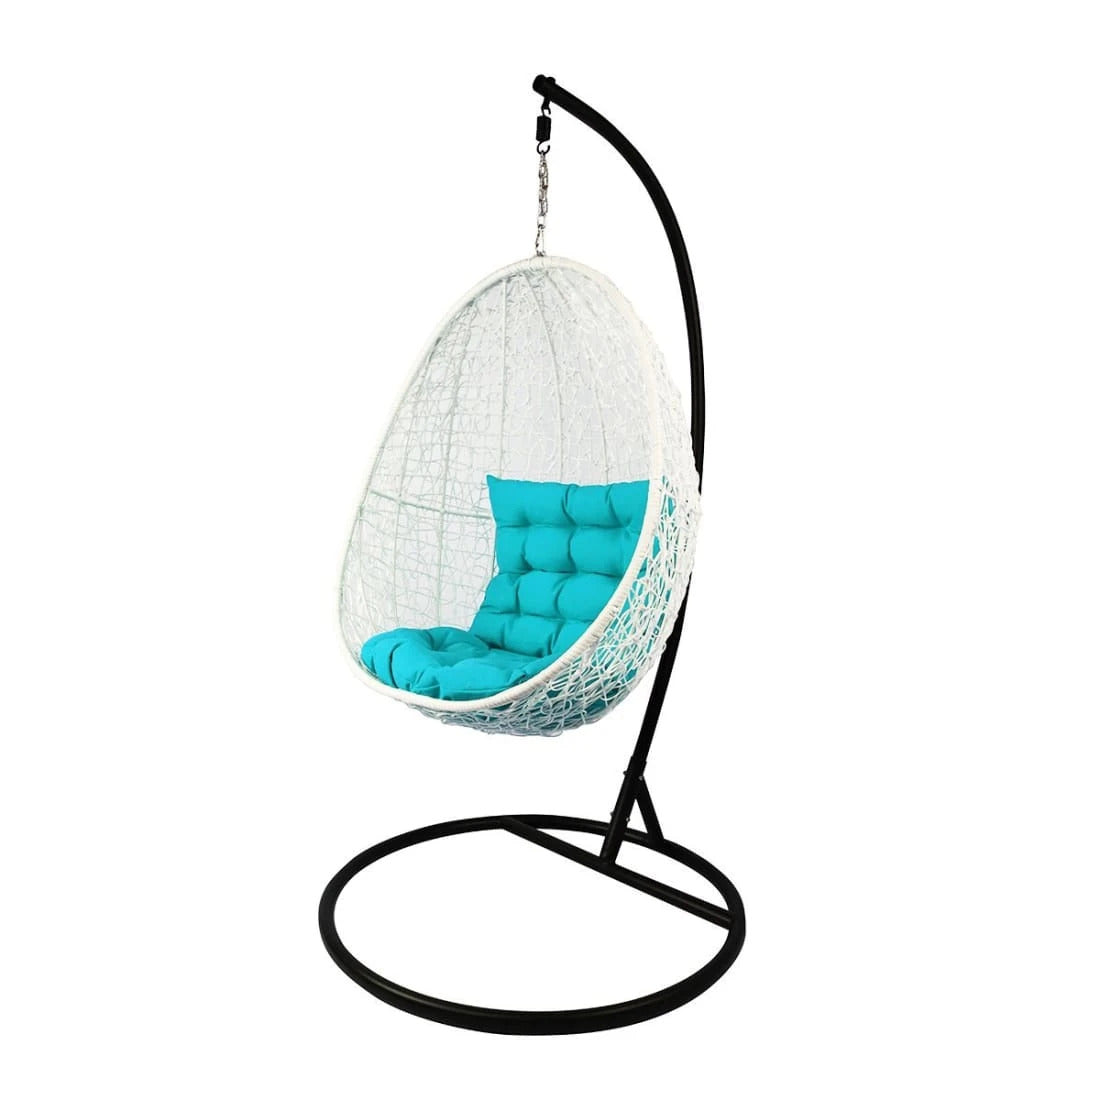 Dreamline Outdoor Furniture Single Seater Hanging Swing With Stand For Balcony , Garden Swing (White)